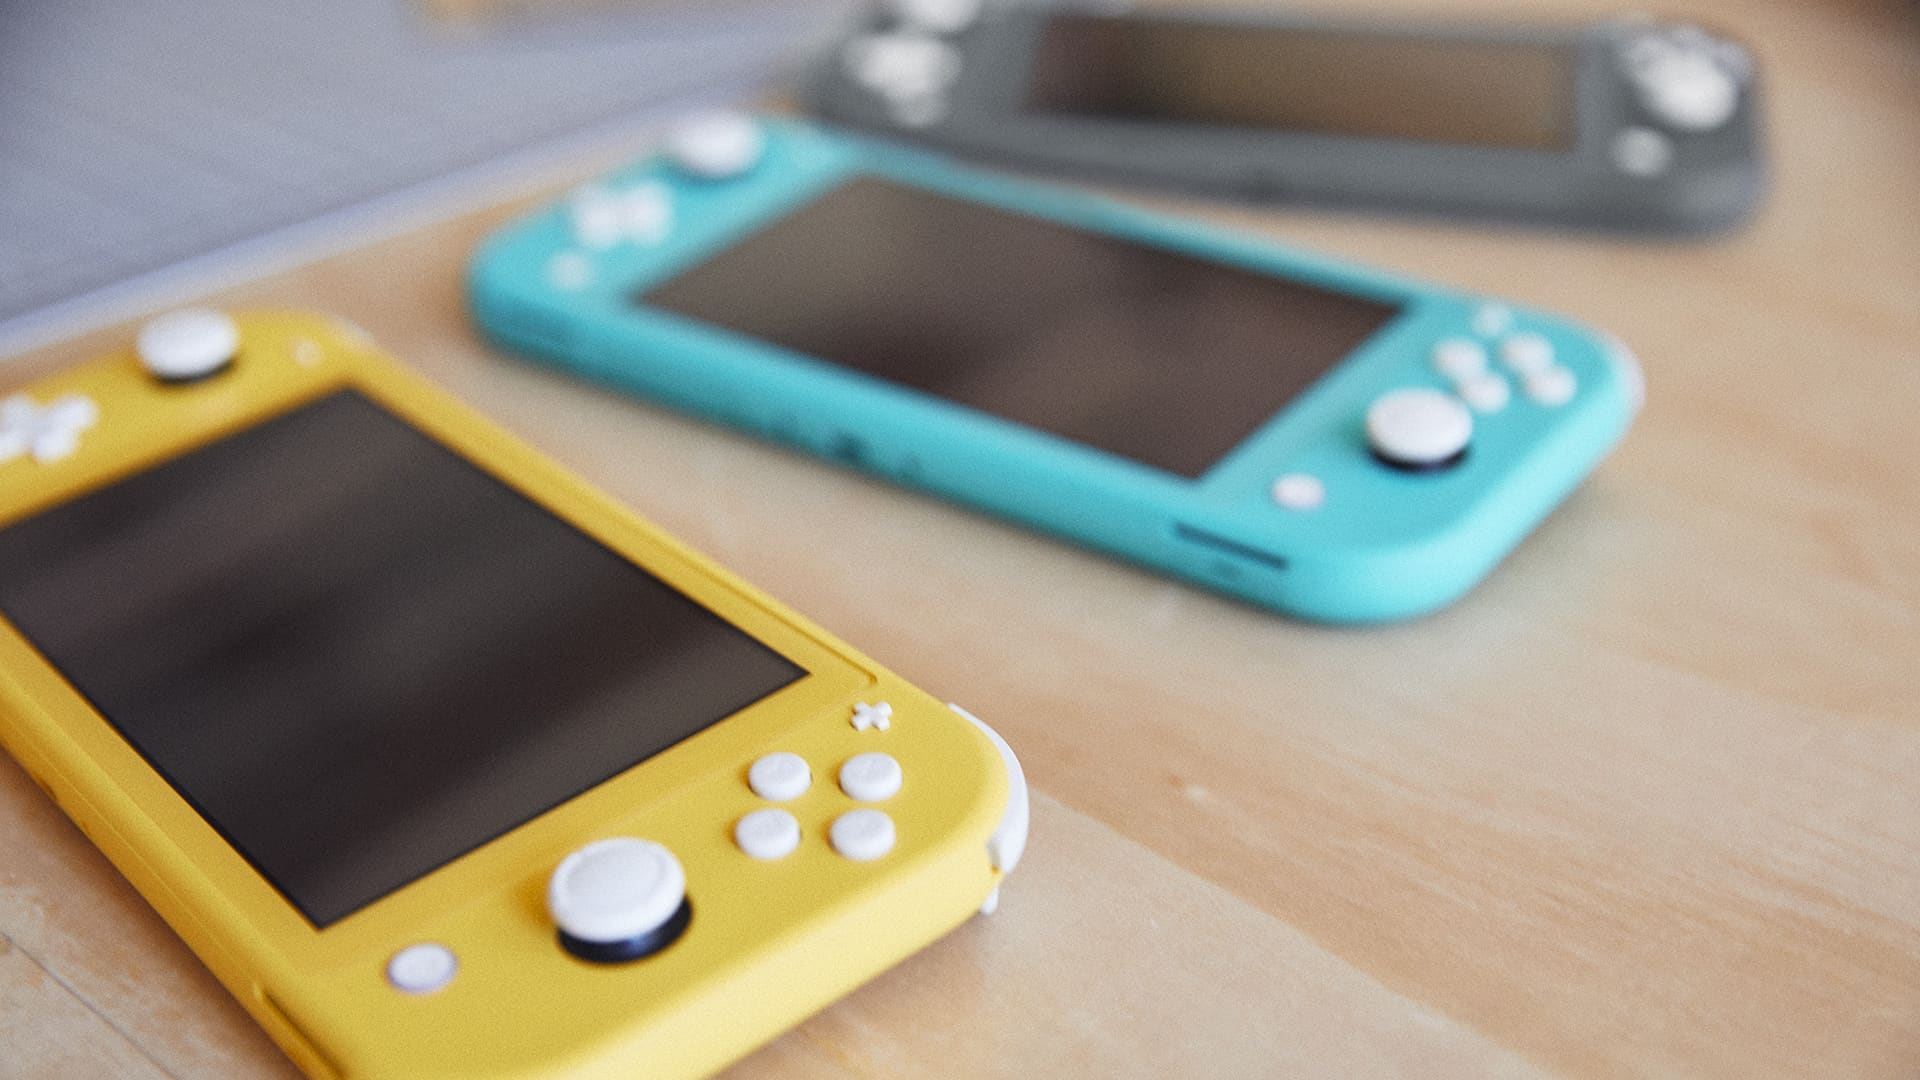 Nintendo Switch Vs Nintendo Switch Lite Which Should You Buy Imore